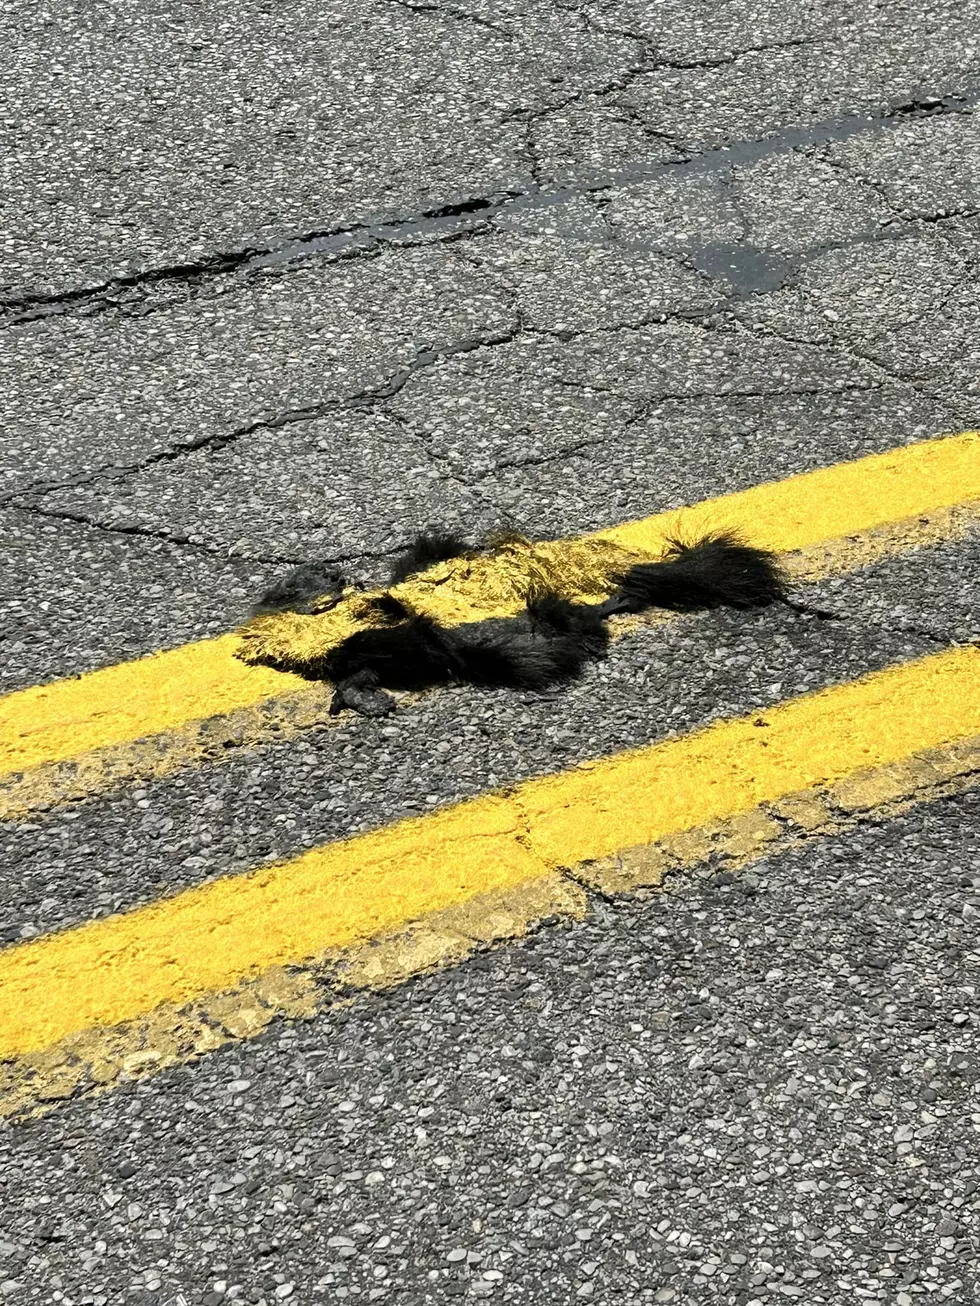 Dead Skunk Gets a Makeover From Grand Rapids Road Crew